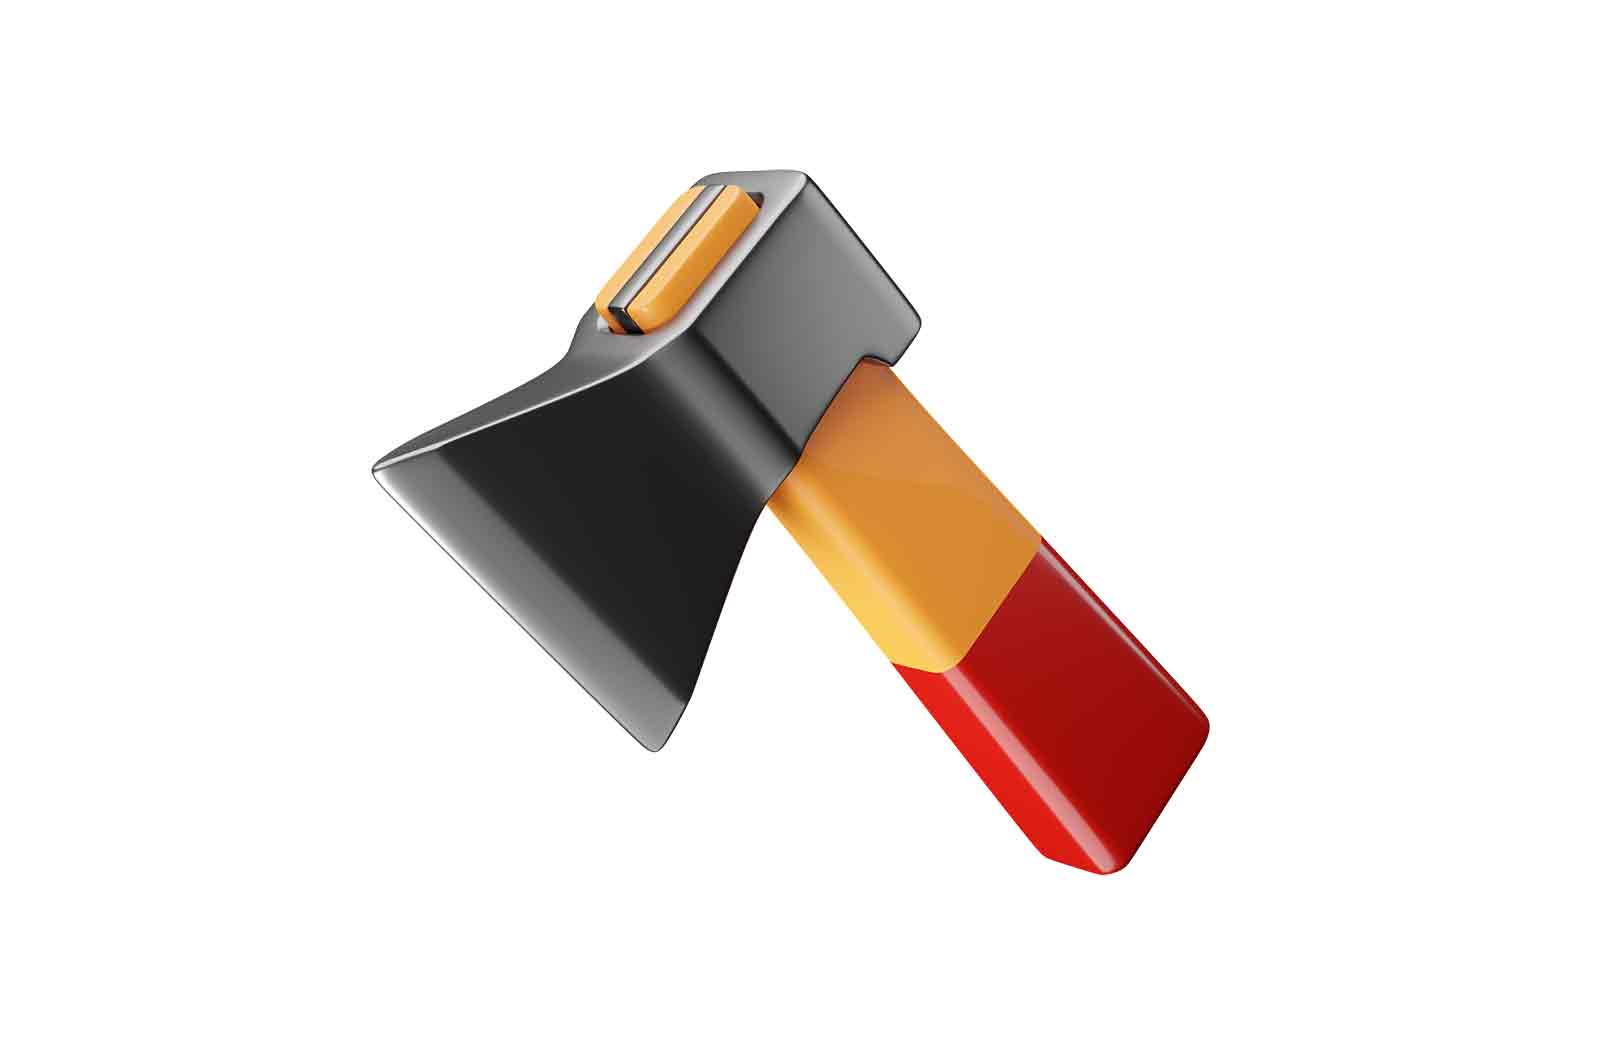 Black axe with red and yellow handle, 3d rendered illustration. A cutting tool used for chopping wood, splitting logs, or felling trees.